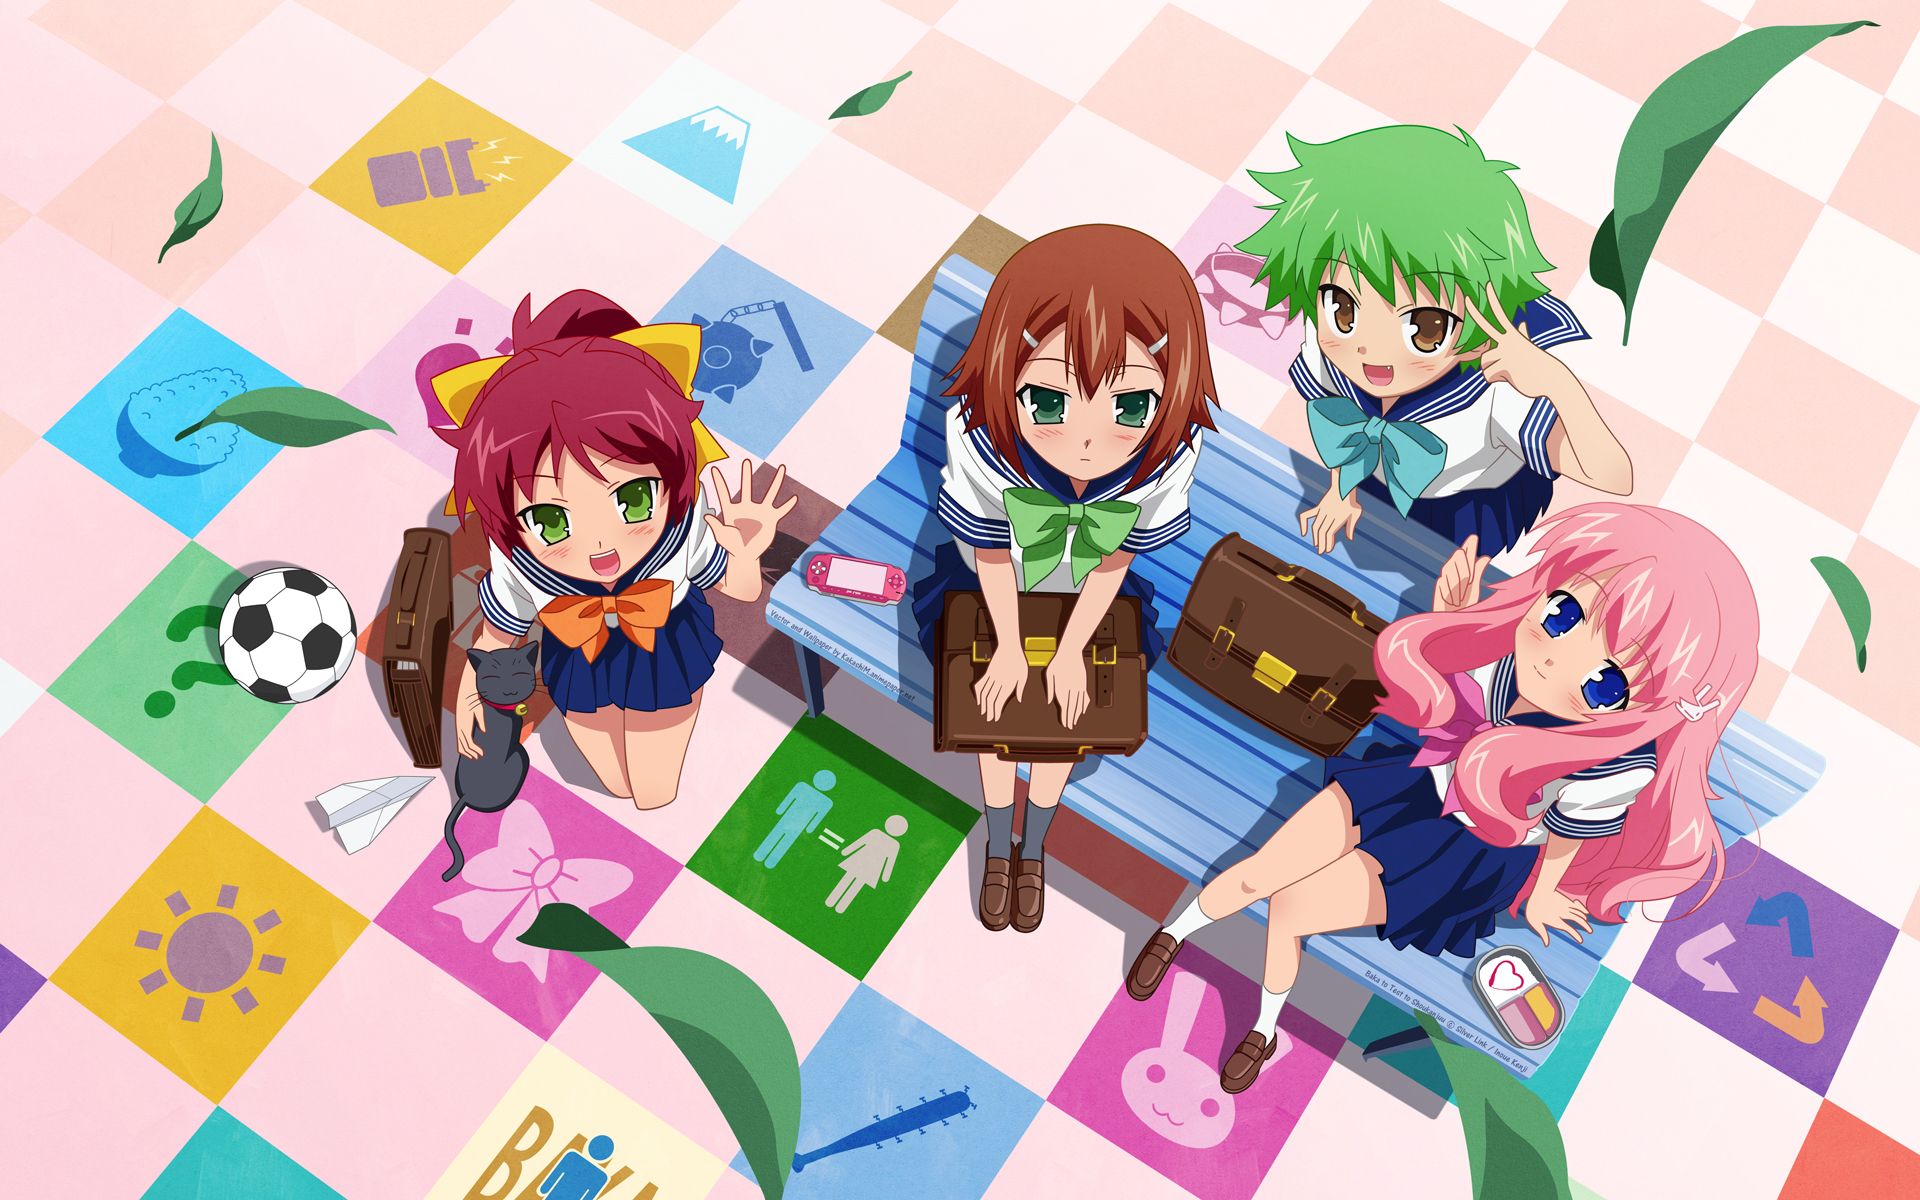 Baka to Test to Shoukanjuu Wallpaper: It's Such a Colorful World